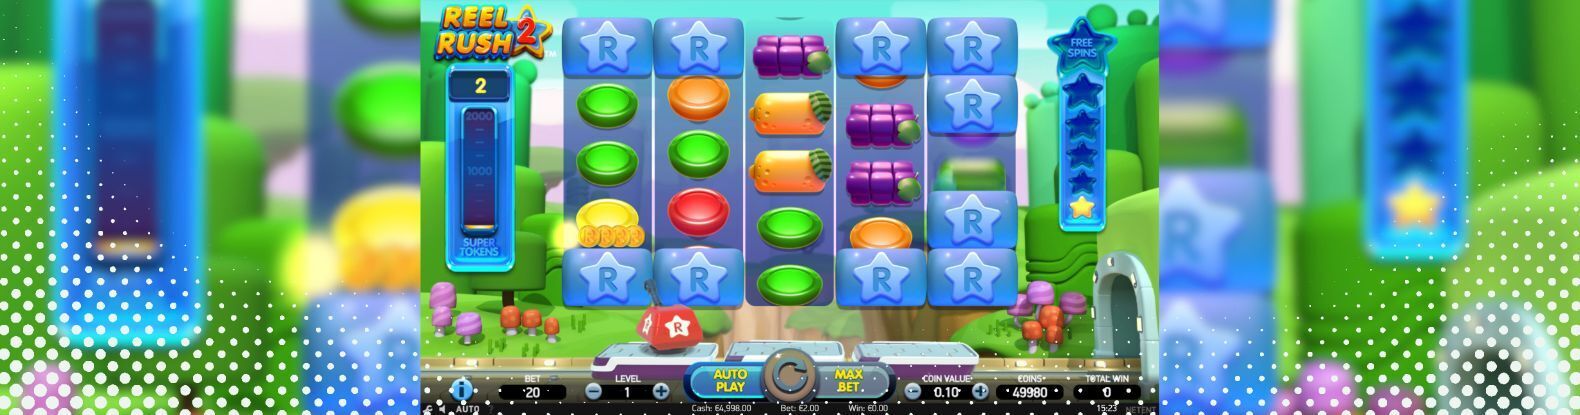 This is a picture of Reel Rush Pokies Game by Netent